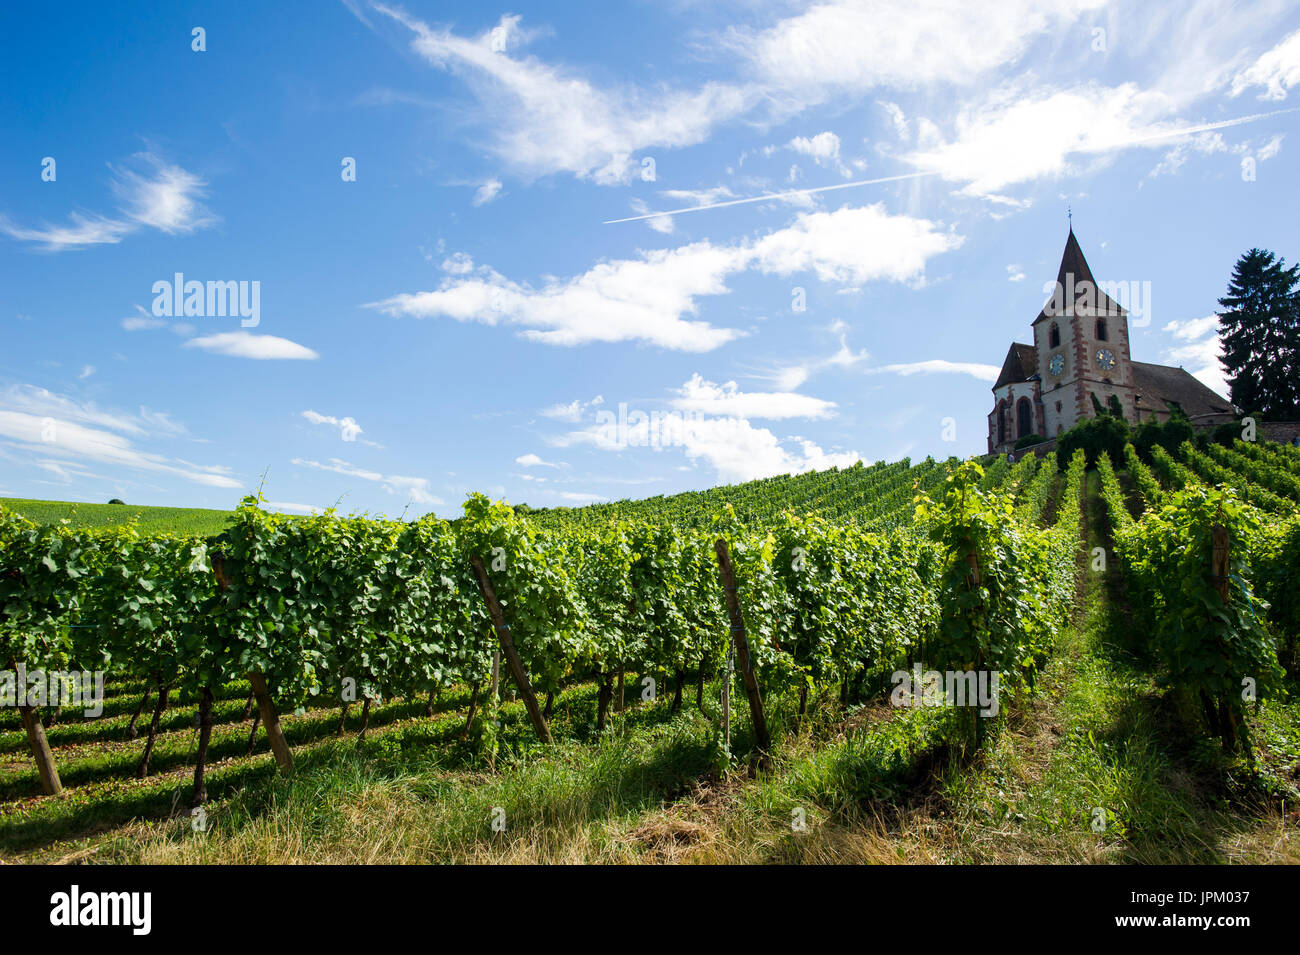 Vineyards in Alsace and Rhinegau in France and Germany, wine growing regions, famous wine producers offering wine tasting and are proud of their wine, Stock Photo